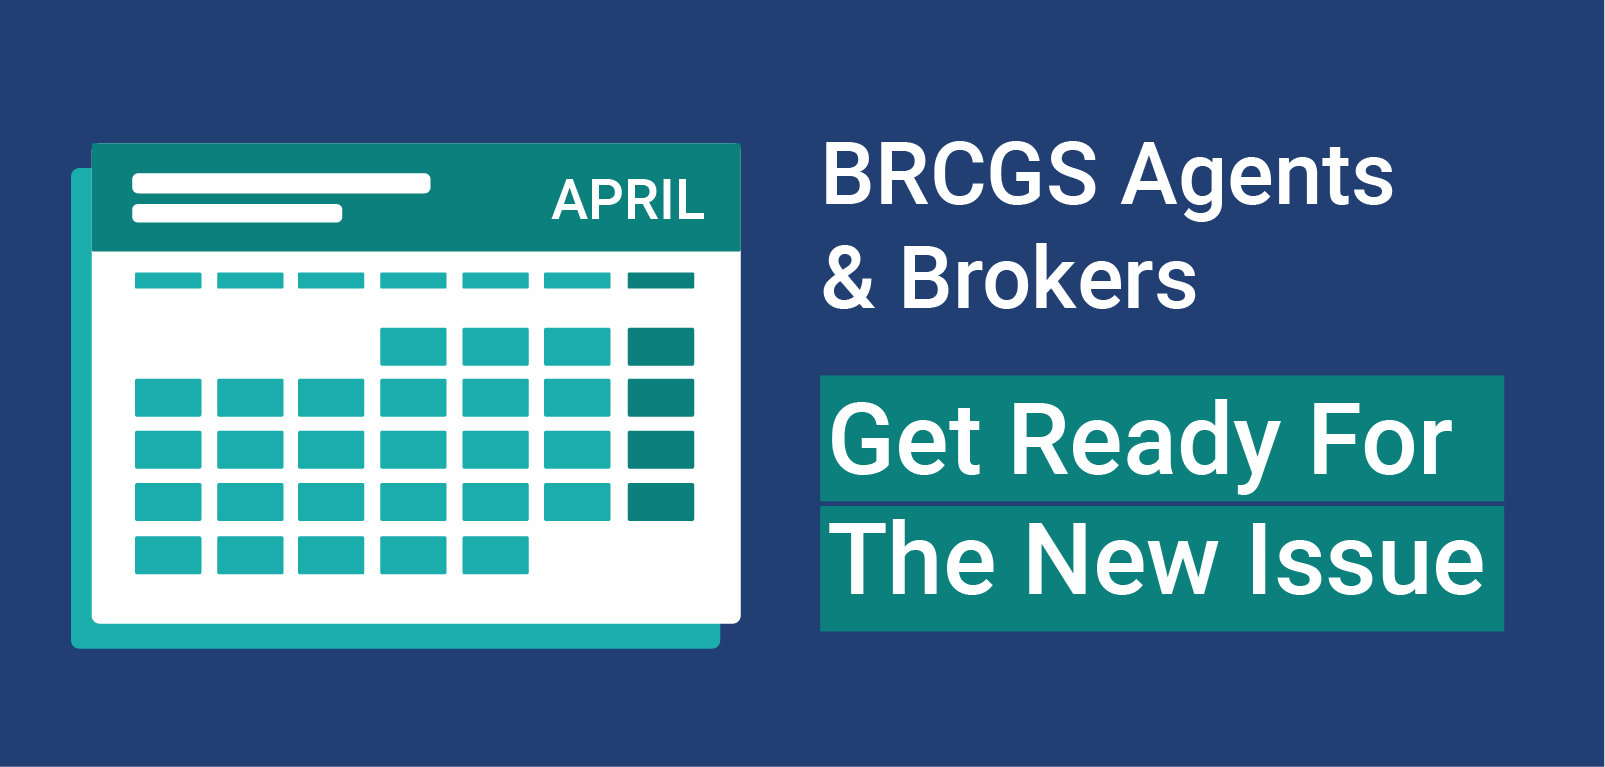 image with a calendar and text saying BRCGS Agents & Brokers Get Ready for the New Issue